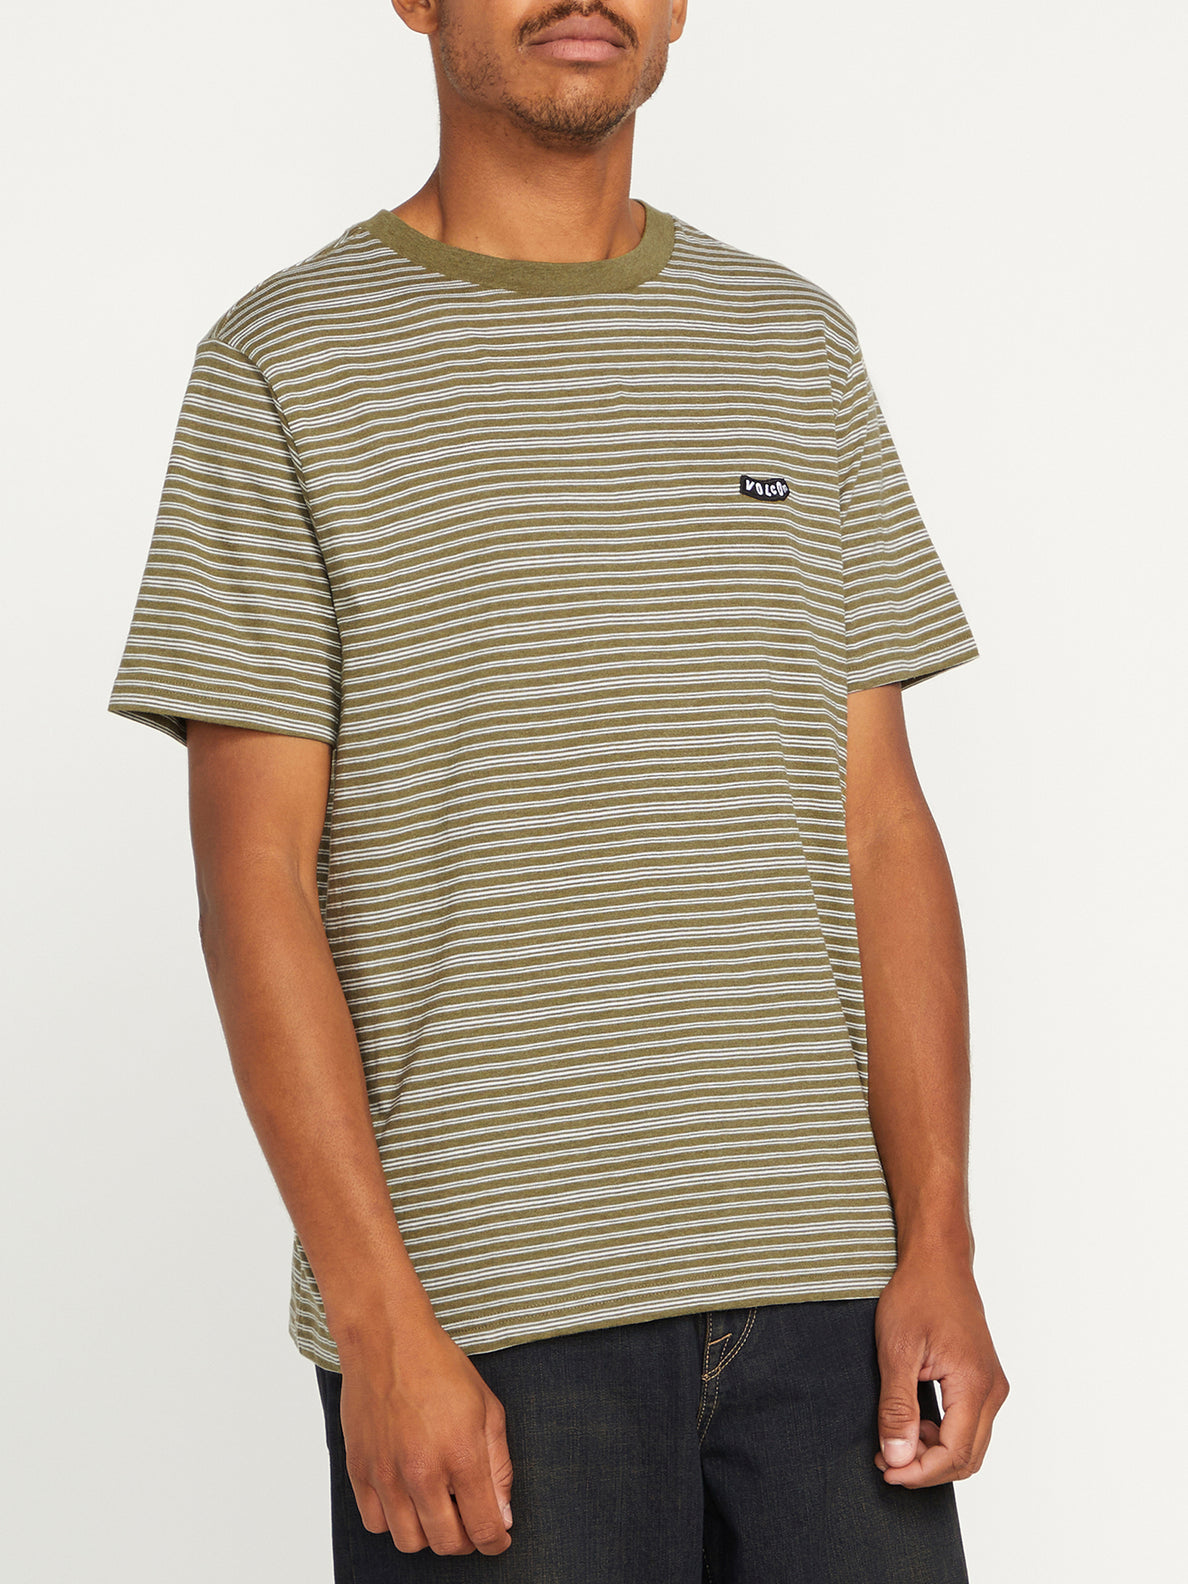 Static Stripe Crew Short Sleeve Shirt - Old Mill (A0112302_OLM) [14]